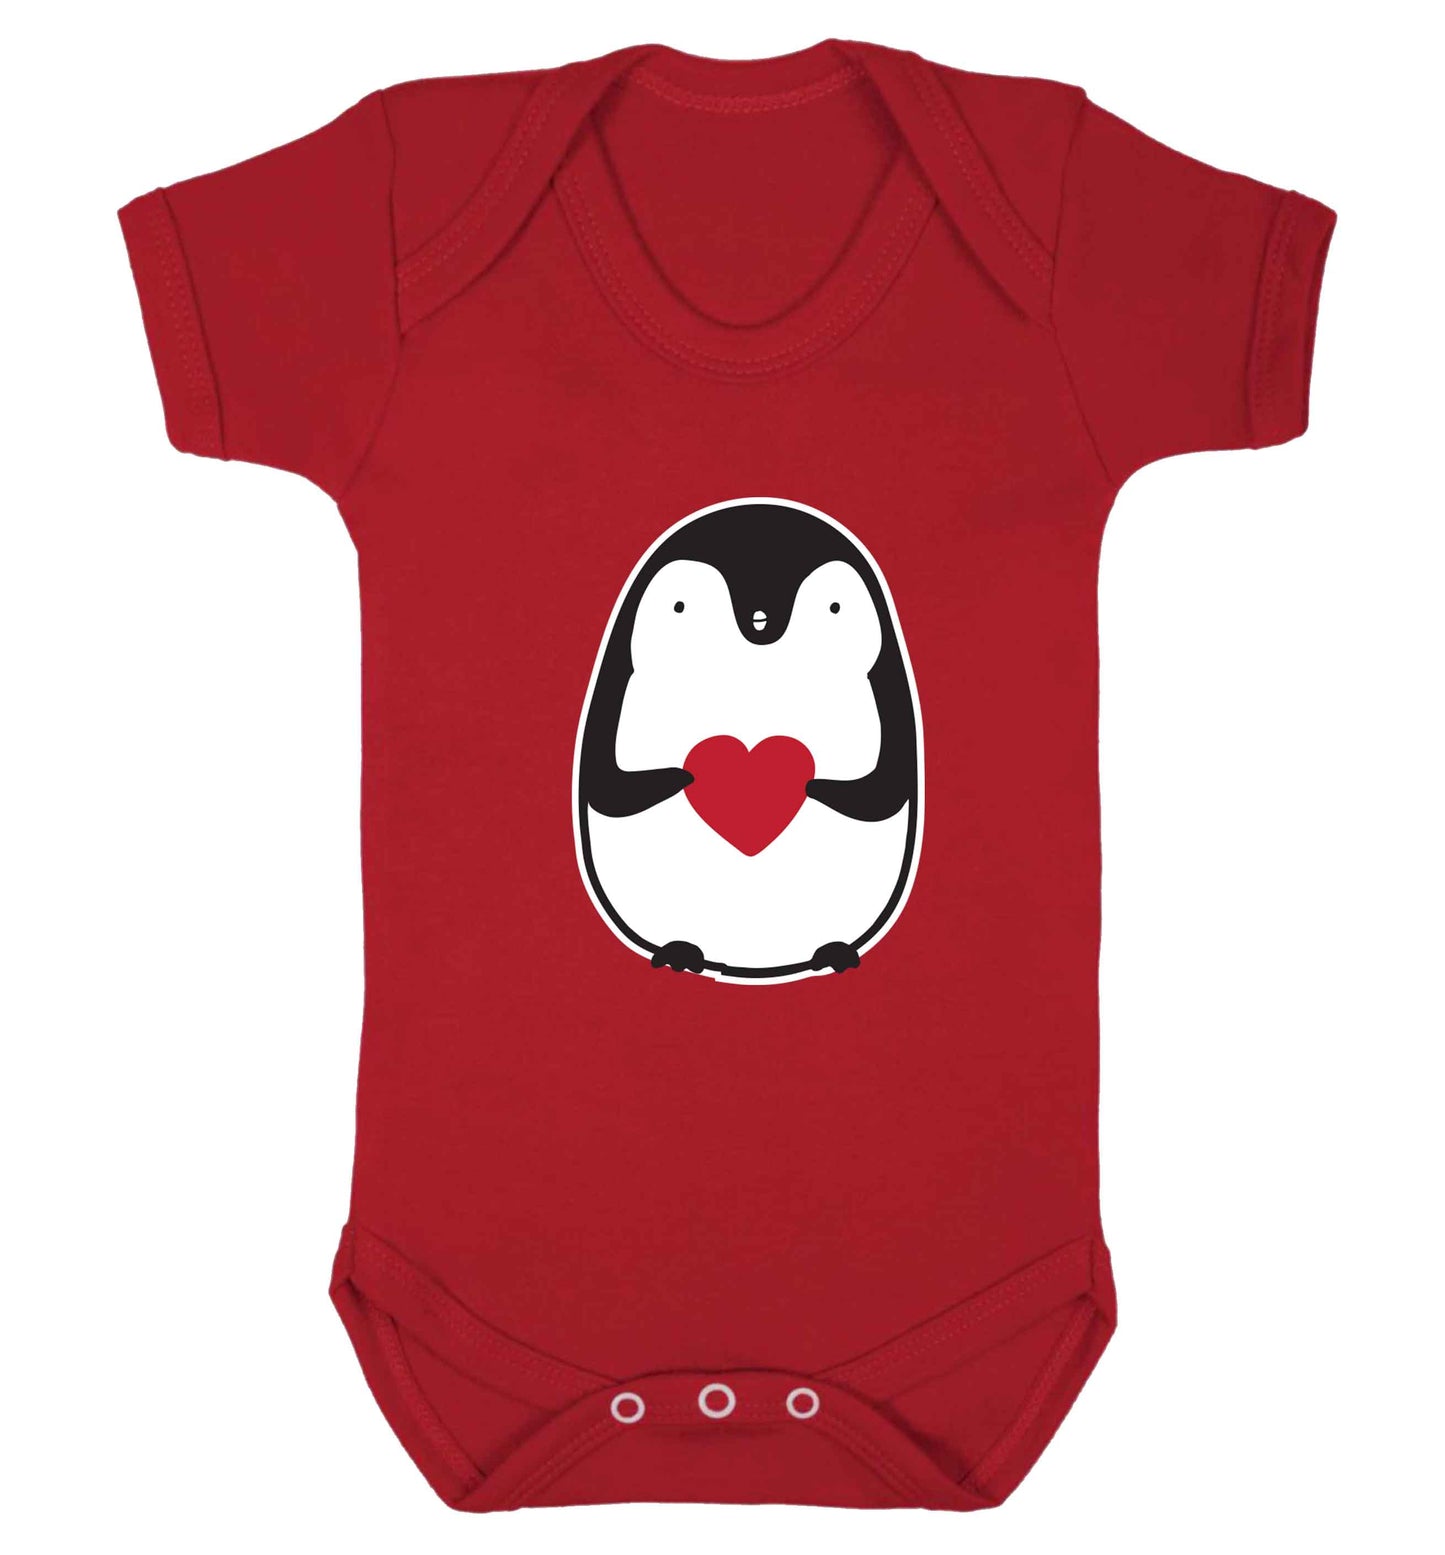 Cute penguin heart baby vest red 18-24 months